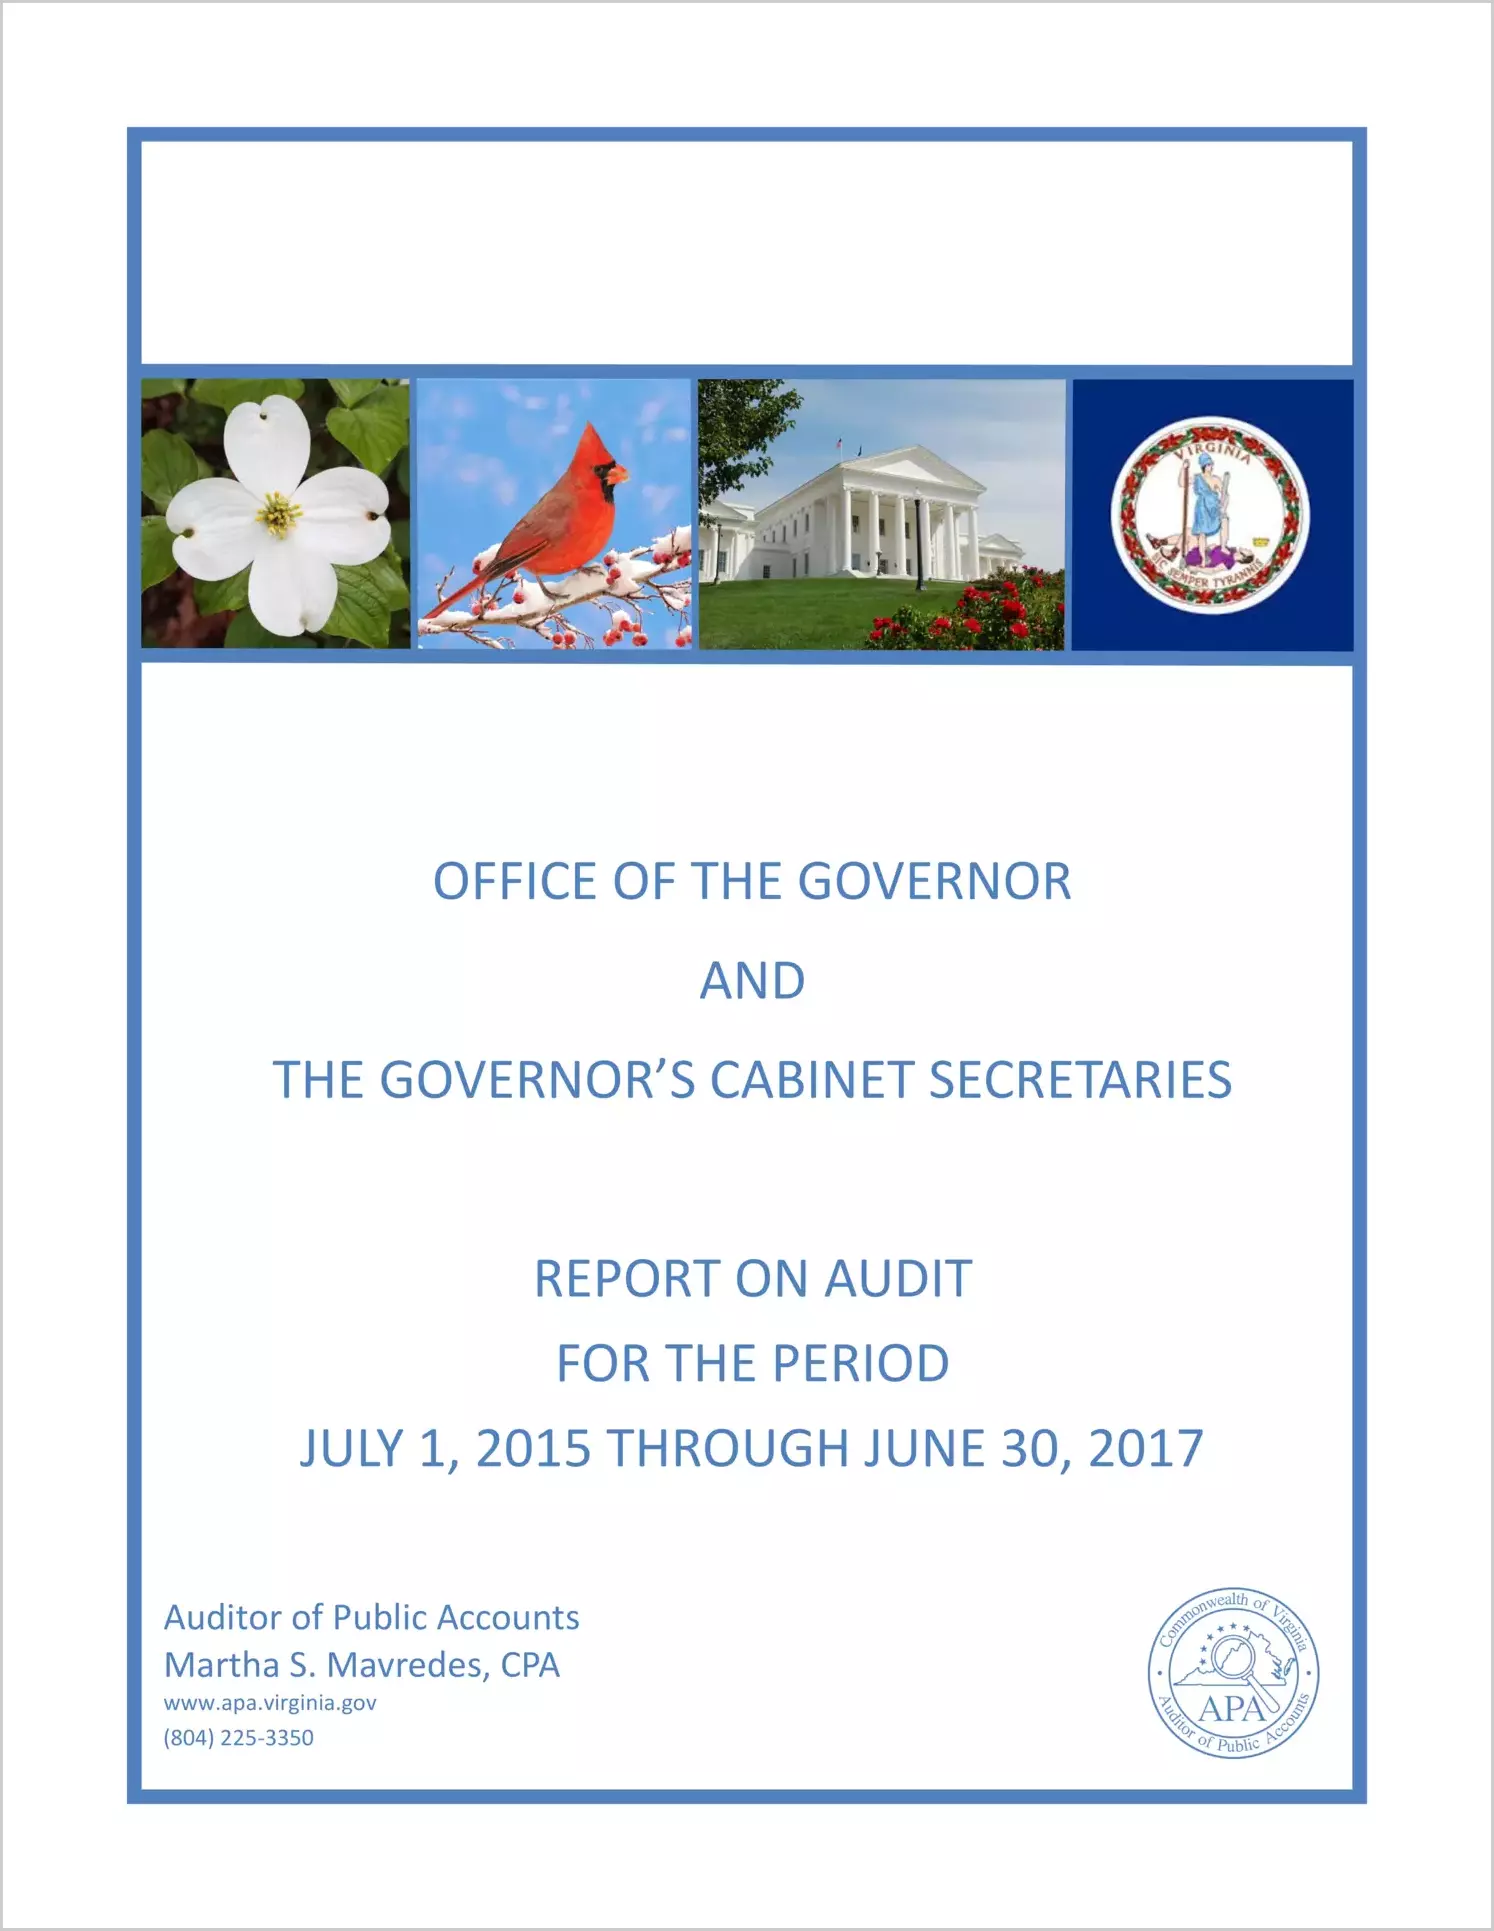 Office of the Governor and the Governor's Cabinet Secretaries for the period July 1, 2015 through June 30, 2017